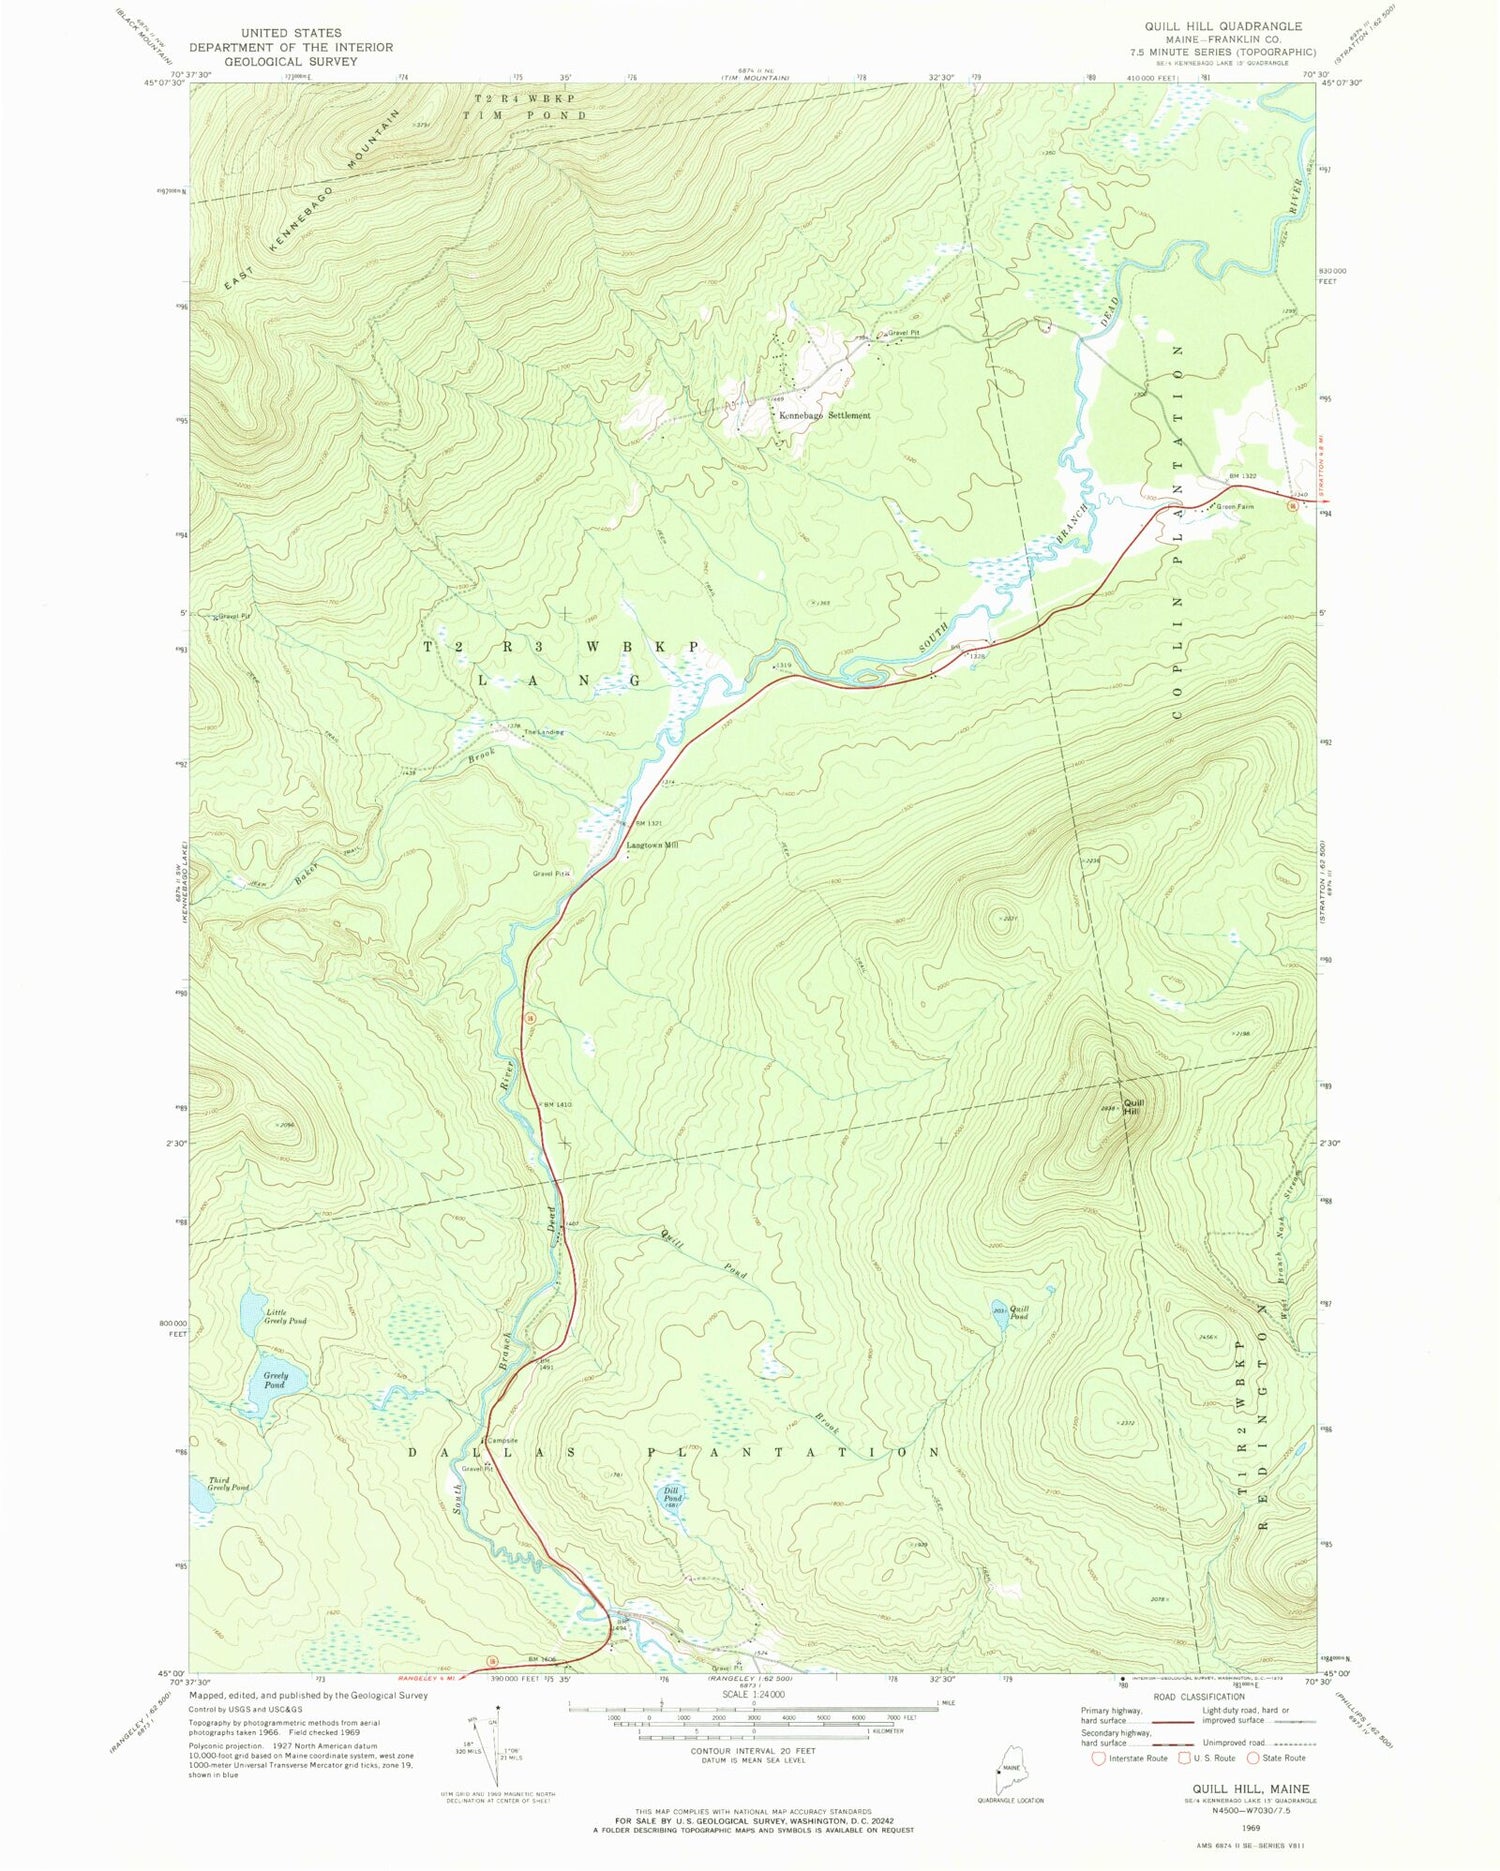 Classic USGS Quill Hill Maine 7.5'x7.5' Topo Map Image